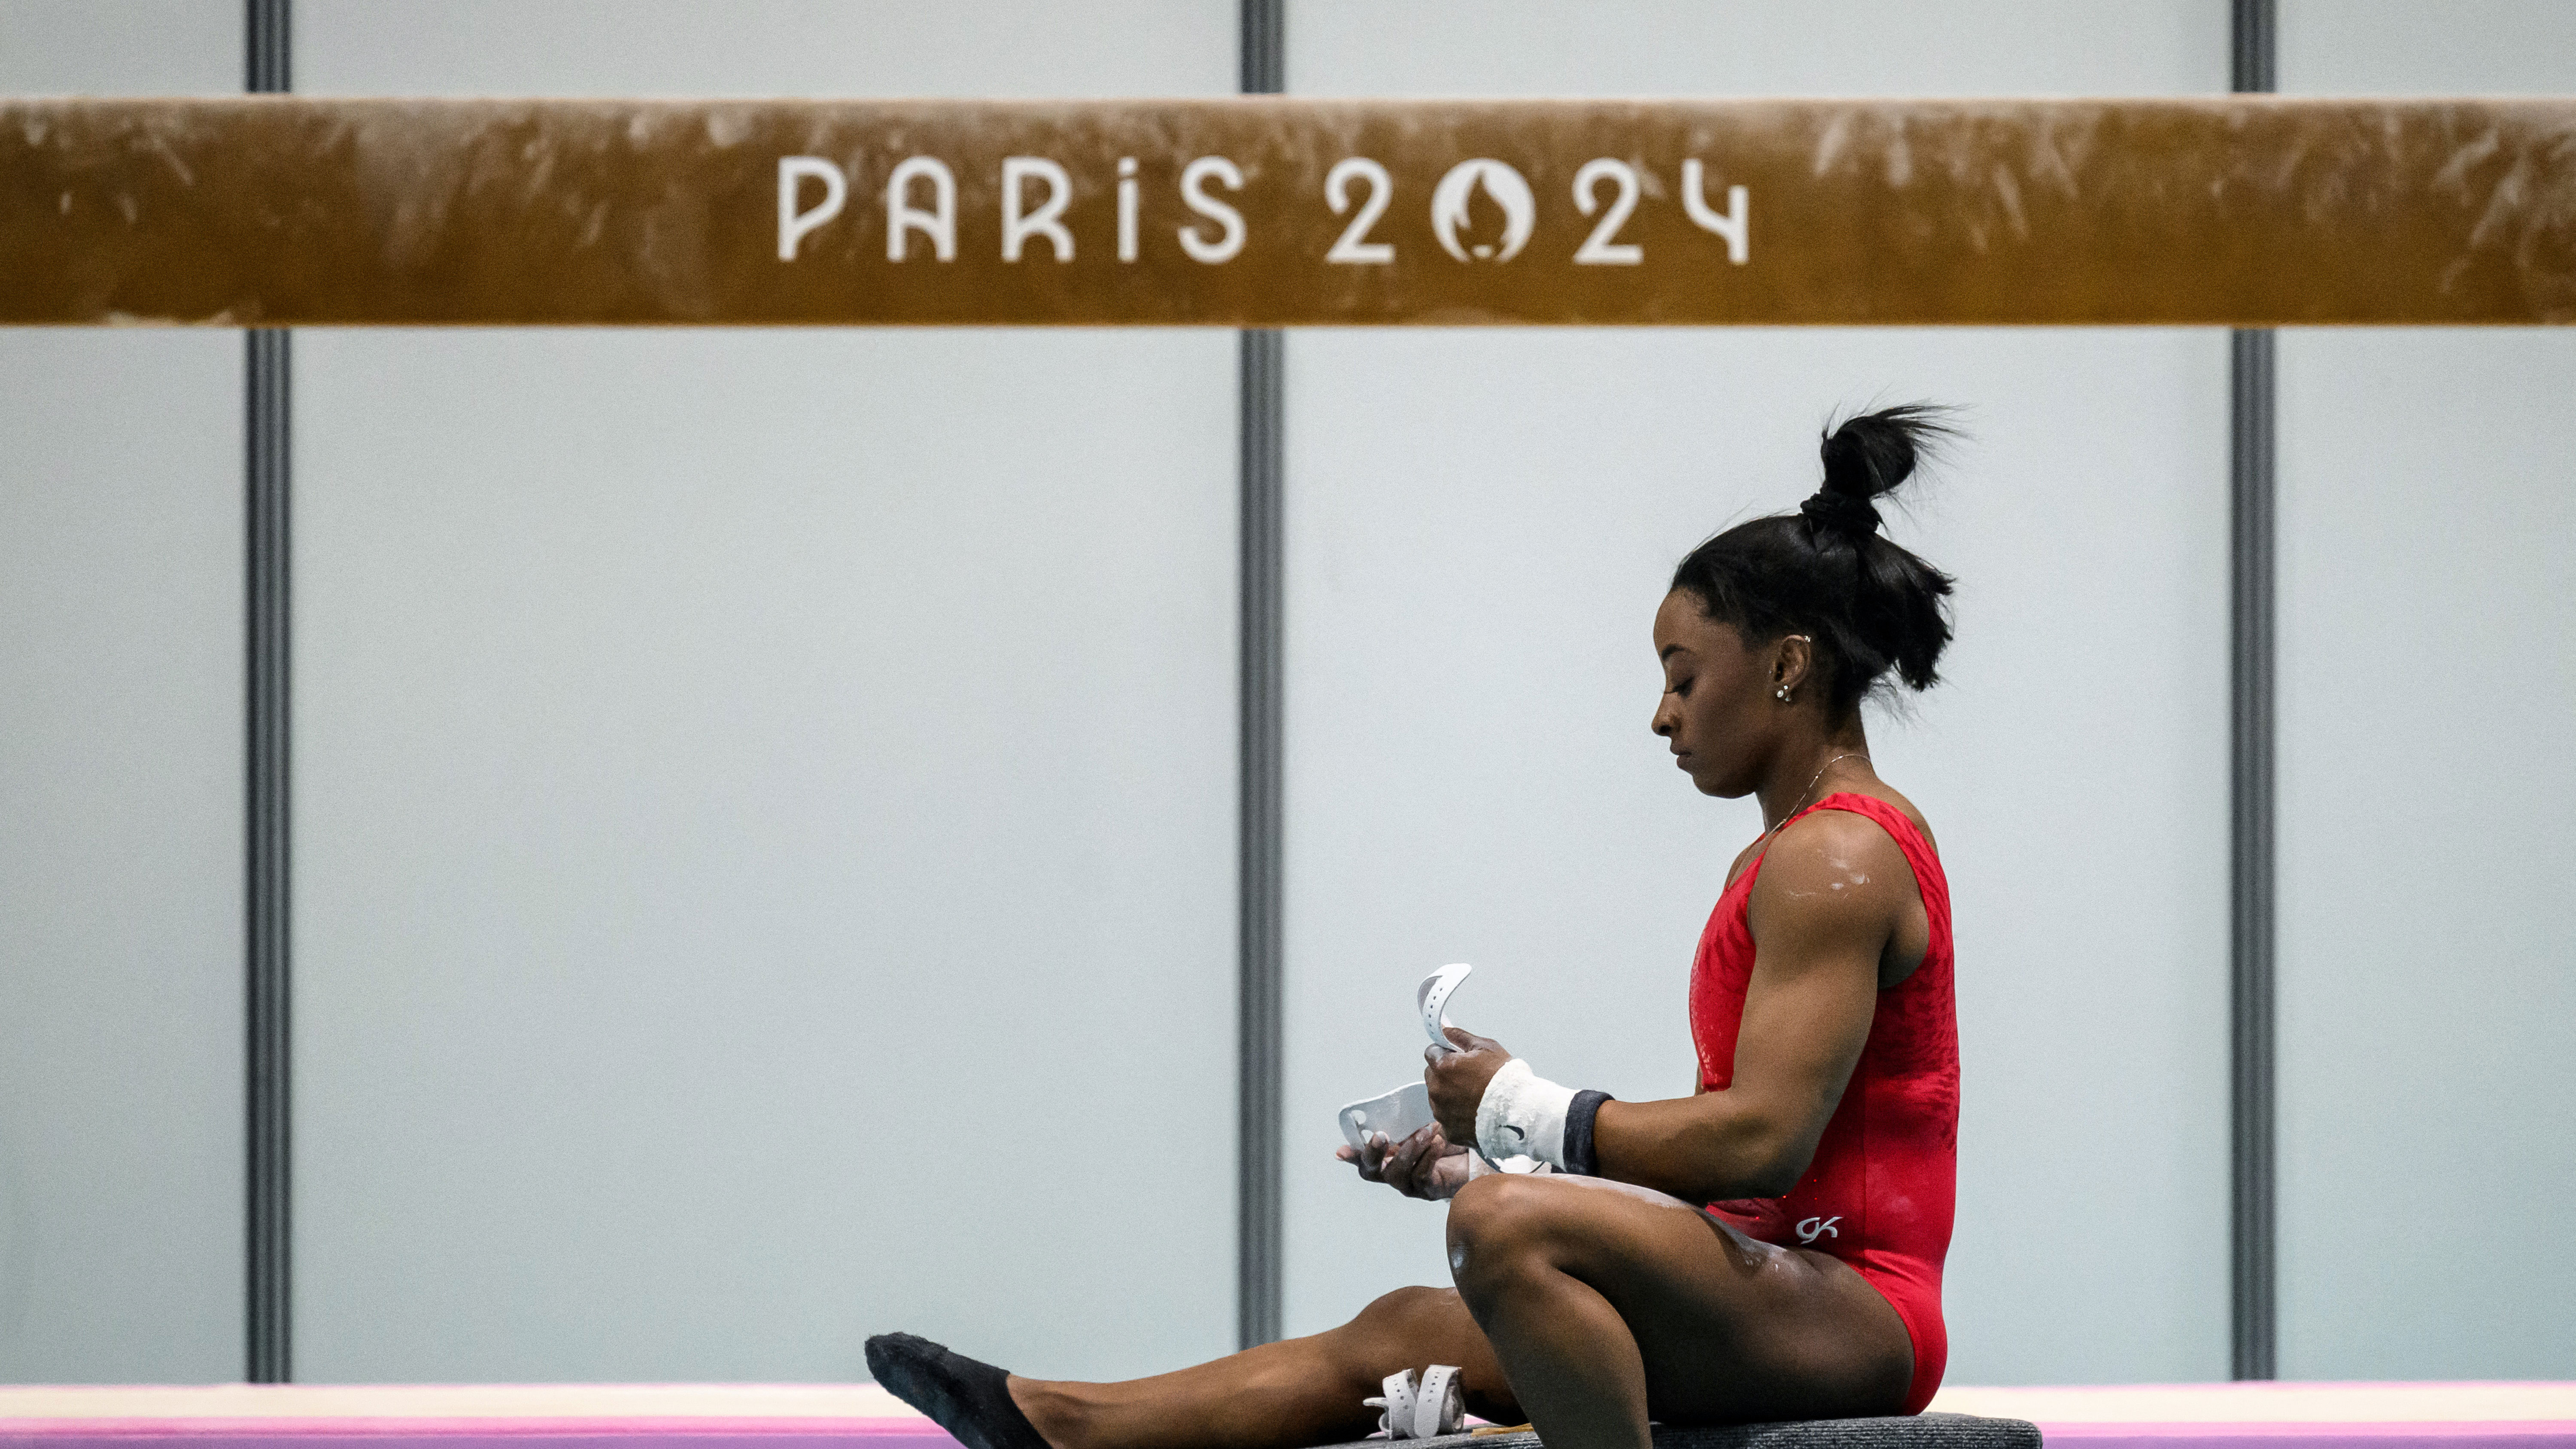 Team USA favored to lead medal count in Paris, but China looms as biggest competitor